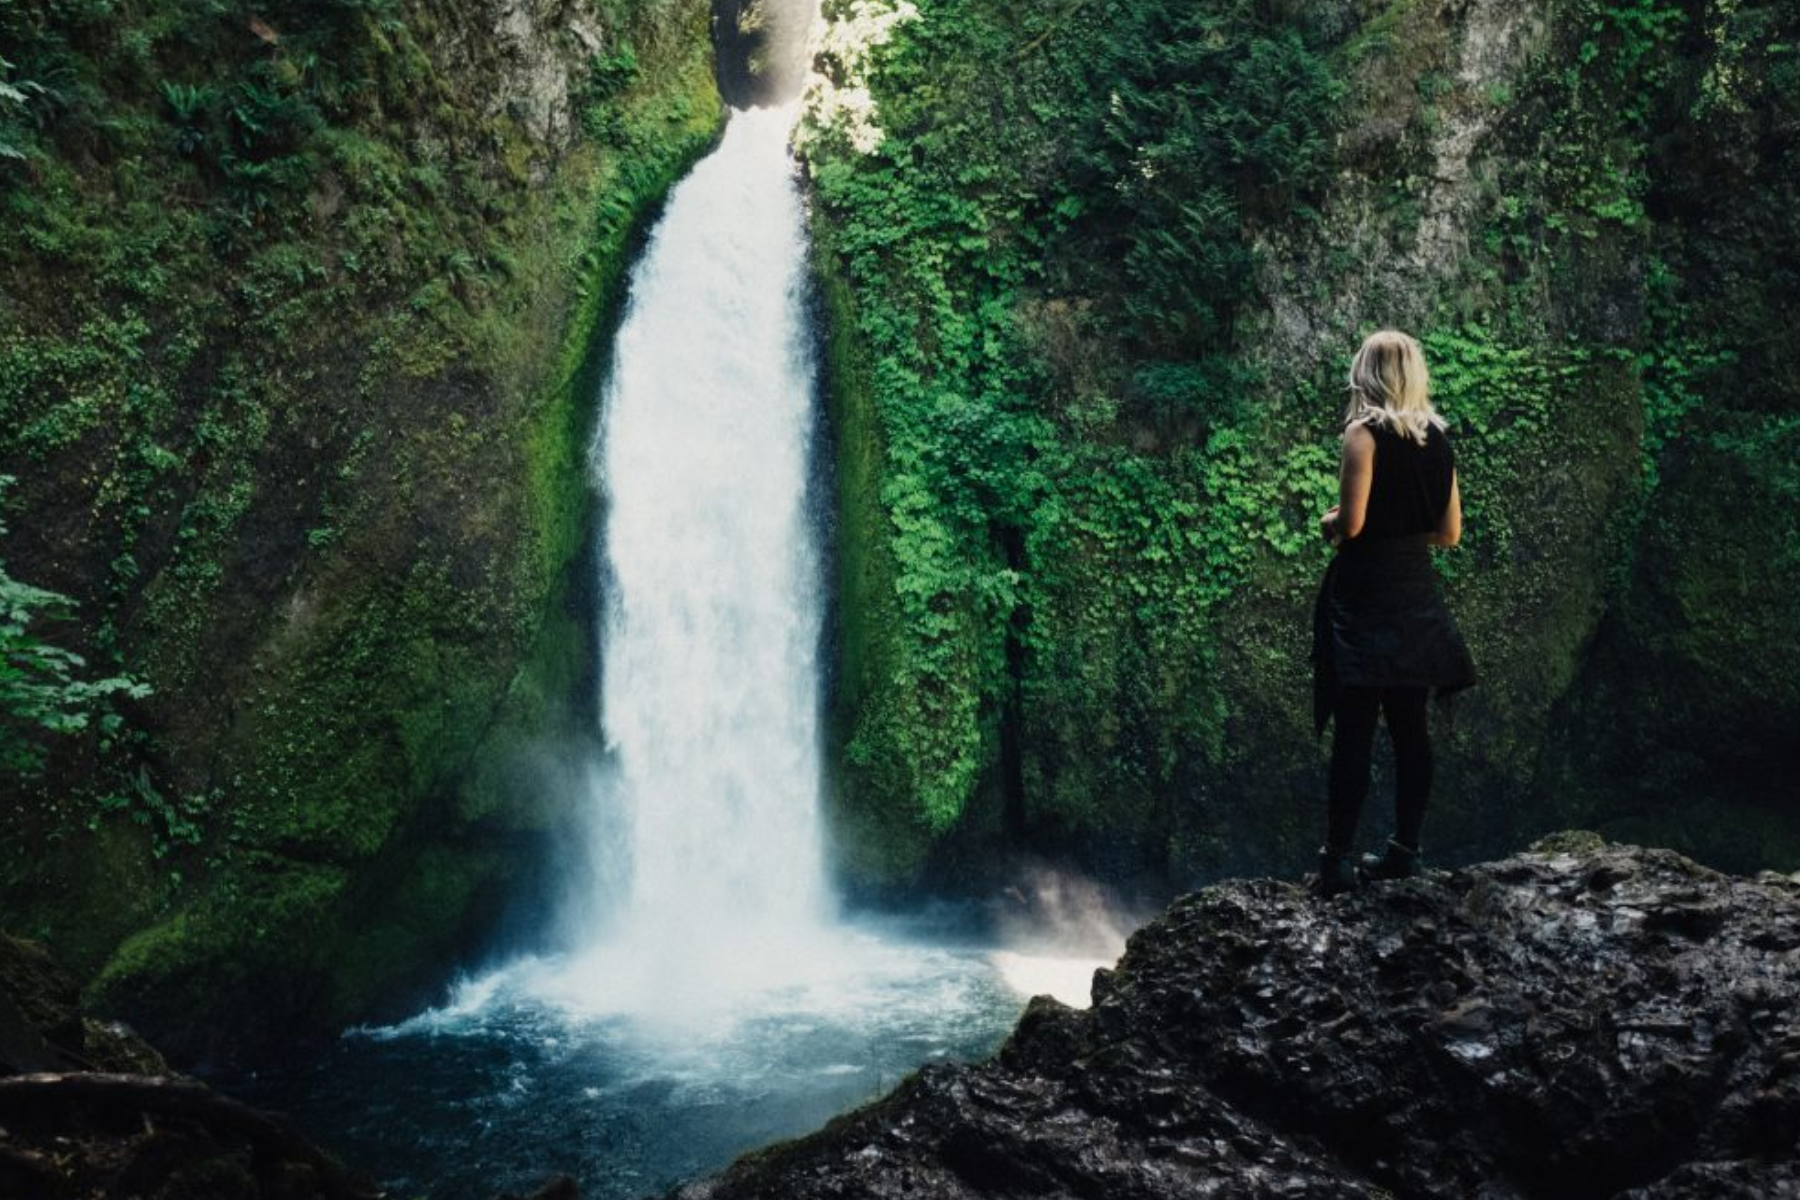 A woman stands on a rock in front of the falls